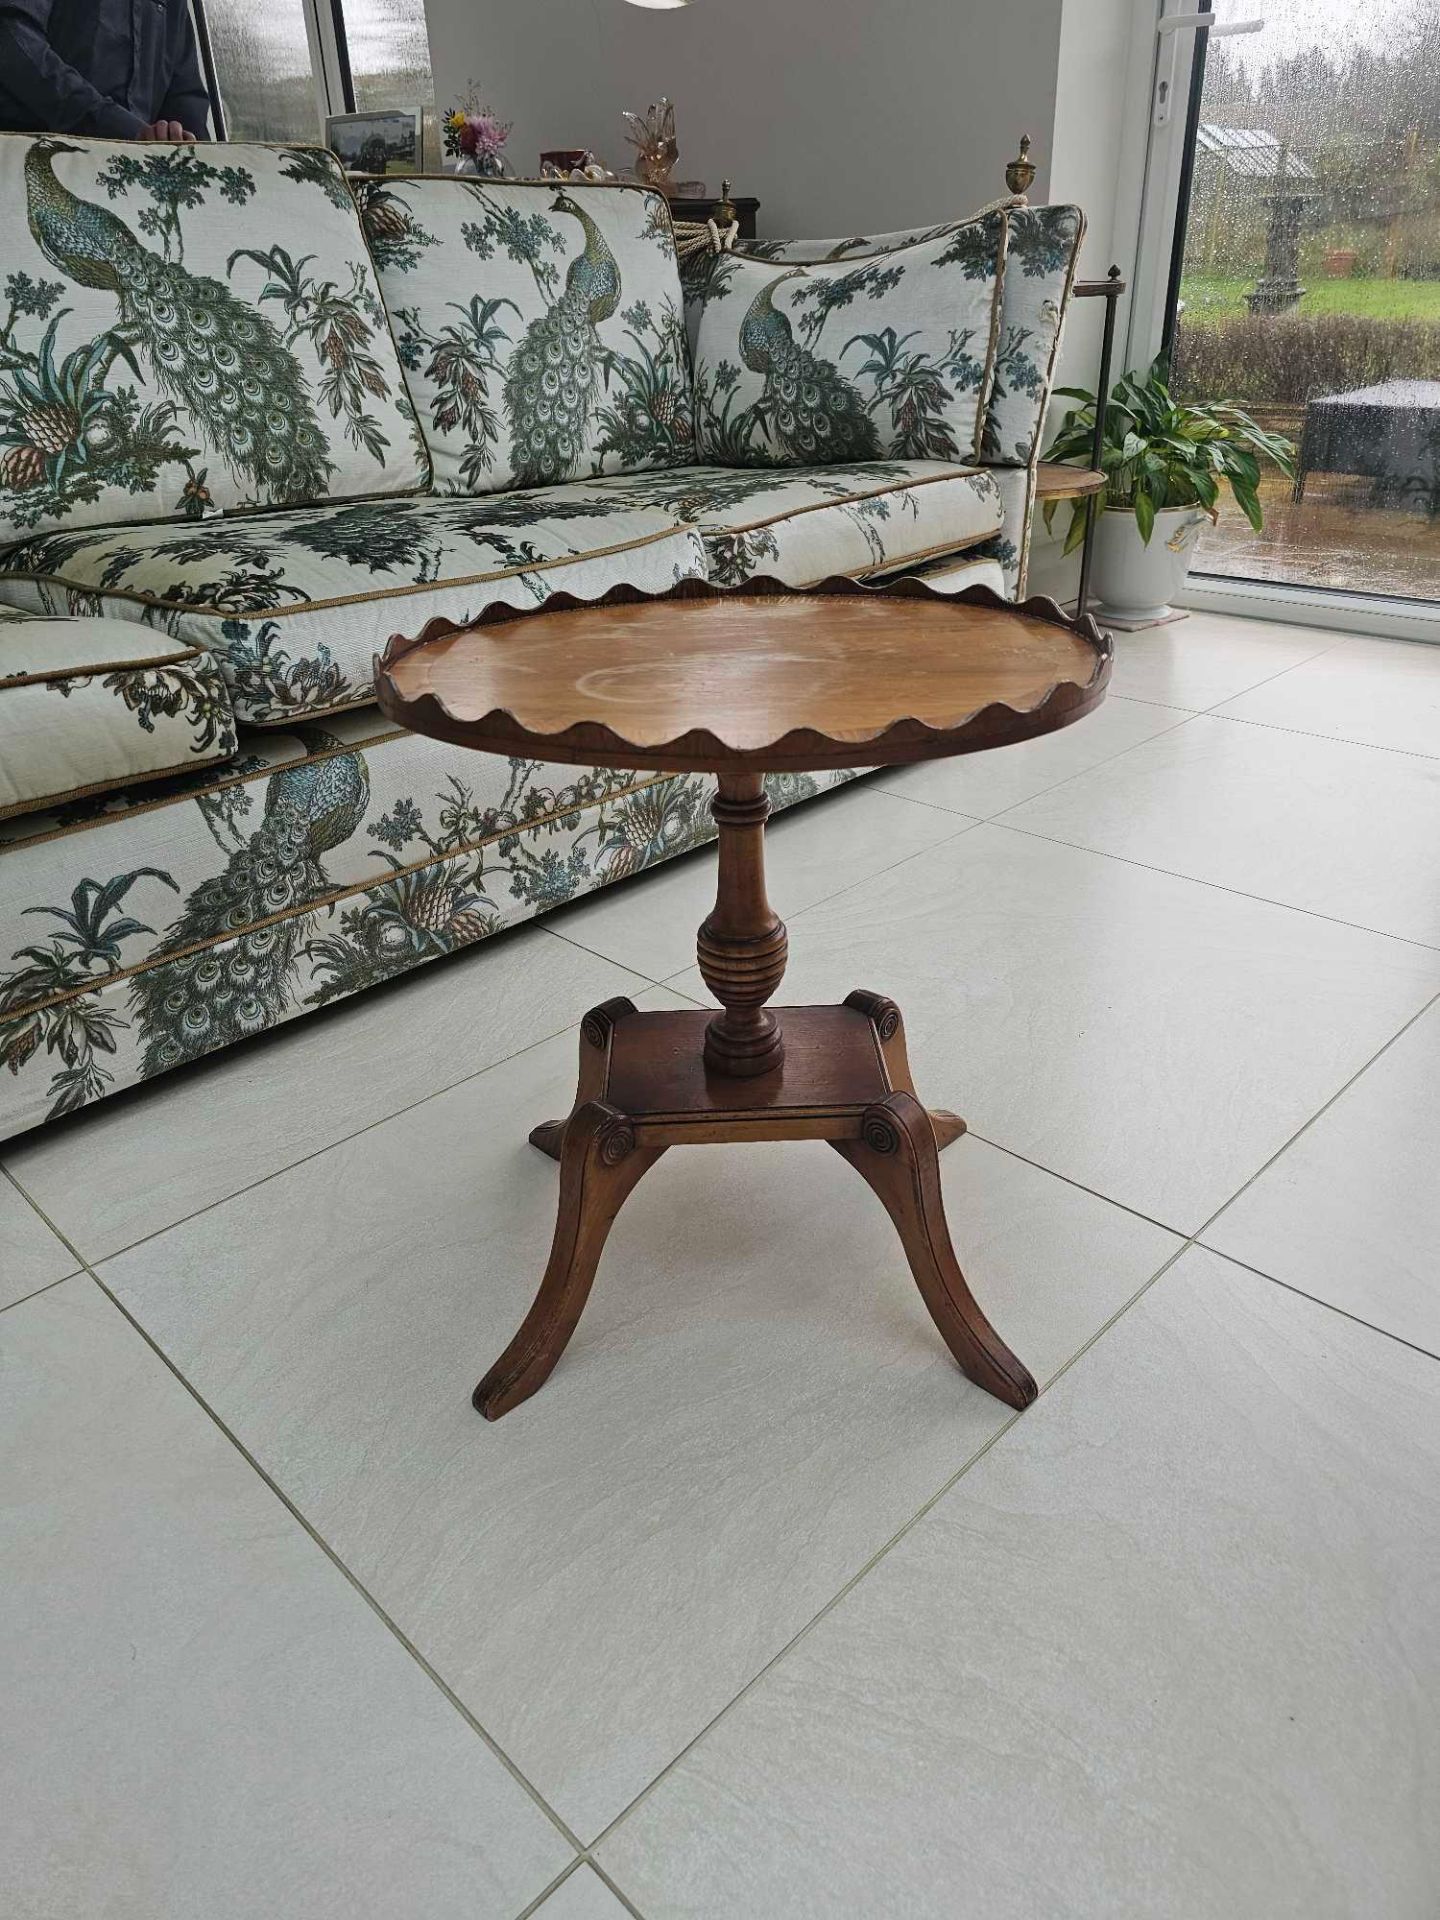 Bevan Funnell Reprodux Oval Mahogany Pedestal Wine Table In The Regency Style Having Shaped Wooden